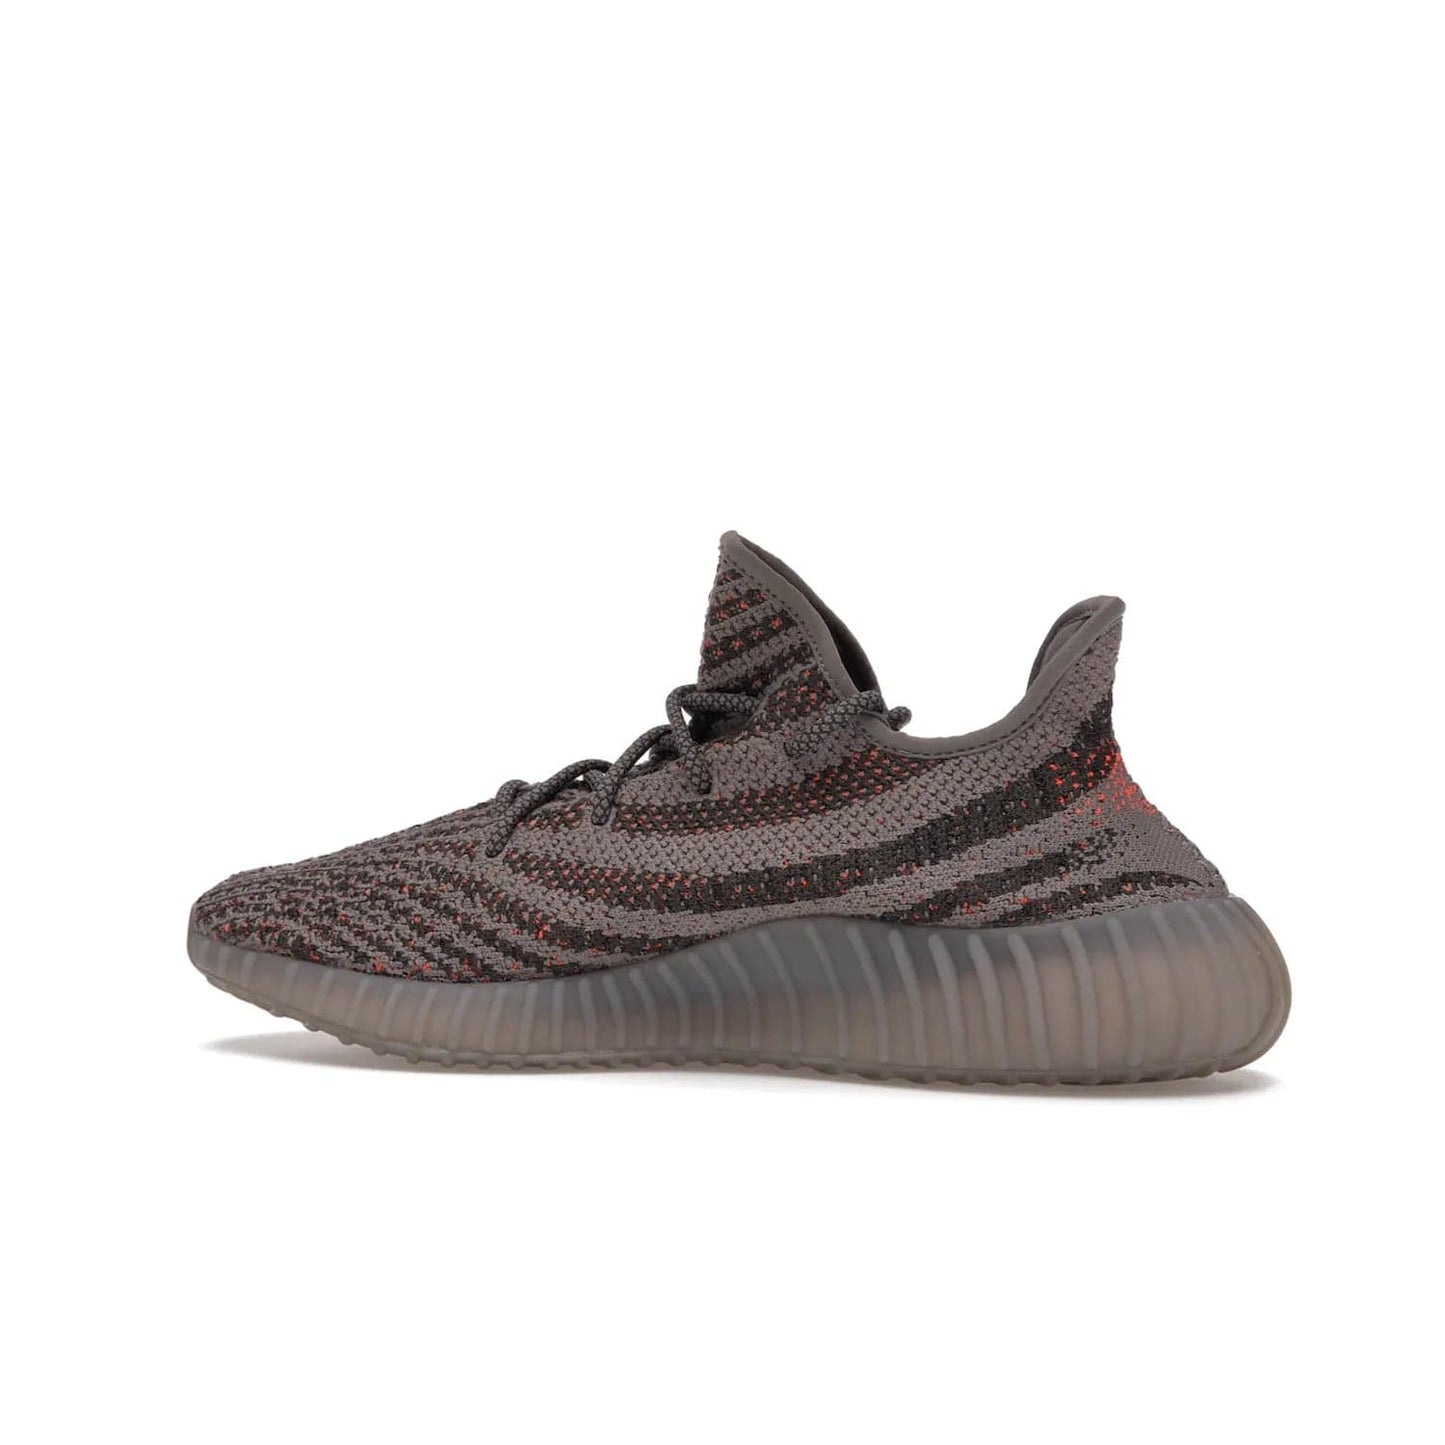 adidas Yeezy Boost 350 V2 Beluga Reflective - Image 21 - Only at www.BallersClubKickz.com - Shop the adidas Yeezy Boost 350 V2 Beluga Reflective: a stylish, reflective sneaker that stands out. Featuring Boost sole, Primeknit upper & signature orange stripe. Available Dec 2021.